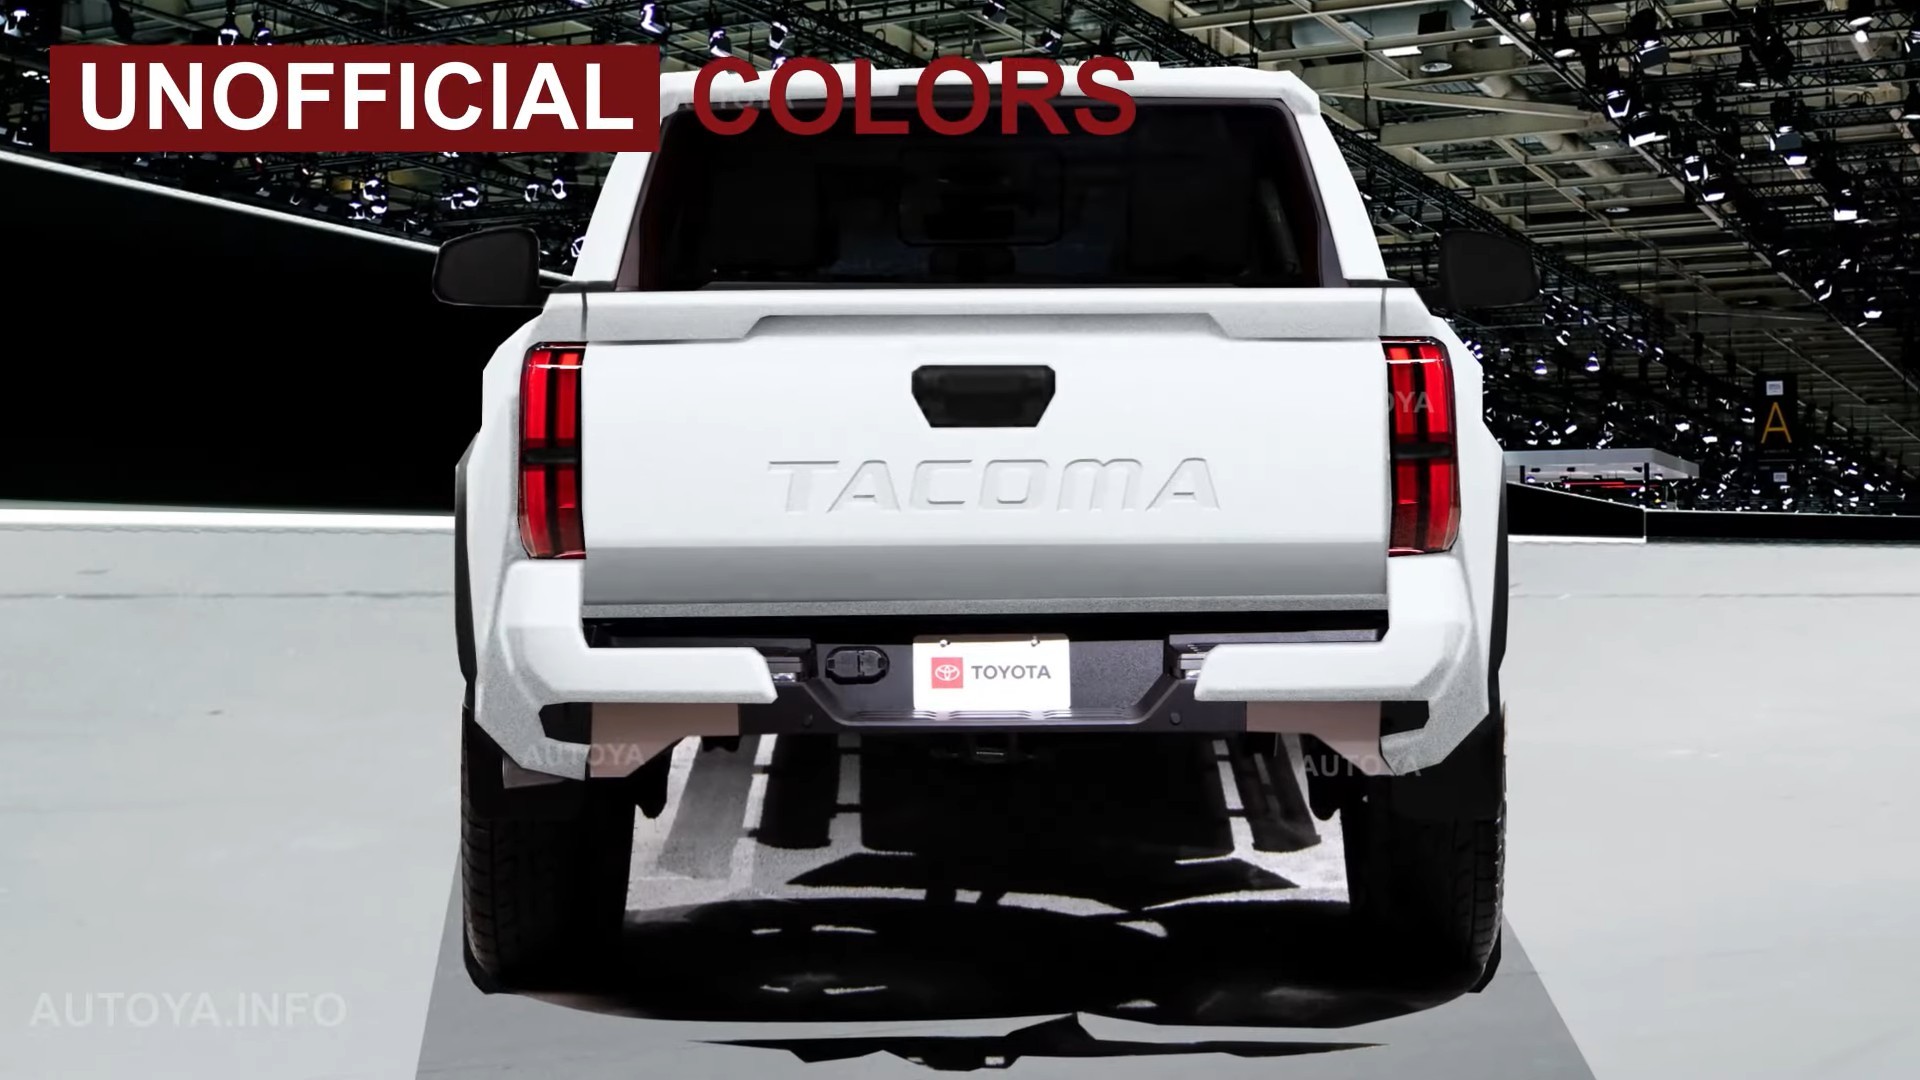 2024 Tacoma 2024 Tacoma TRD Colors Previewed Via CGI Renderings 2024-toyota-tacoma-trd-brandishes-all-juicy-color-options-albeit-only-in-cgi_21